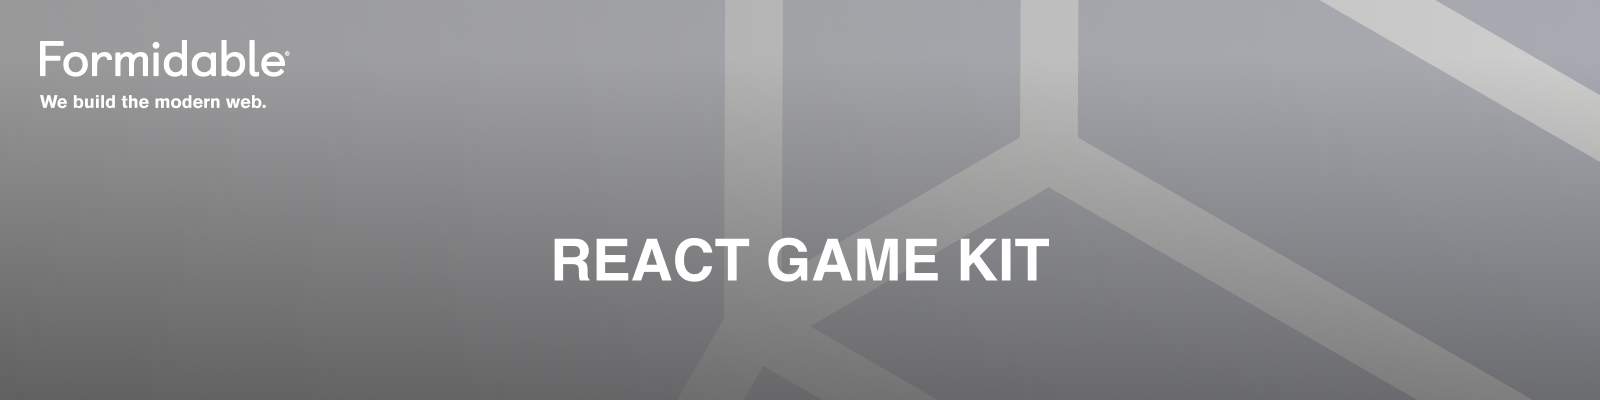 React Game Kit — Formidable, We build the modern web